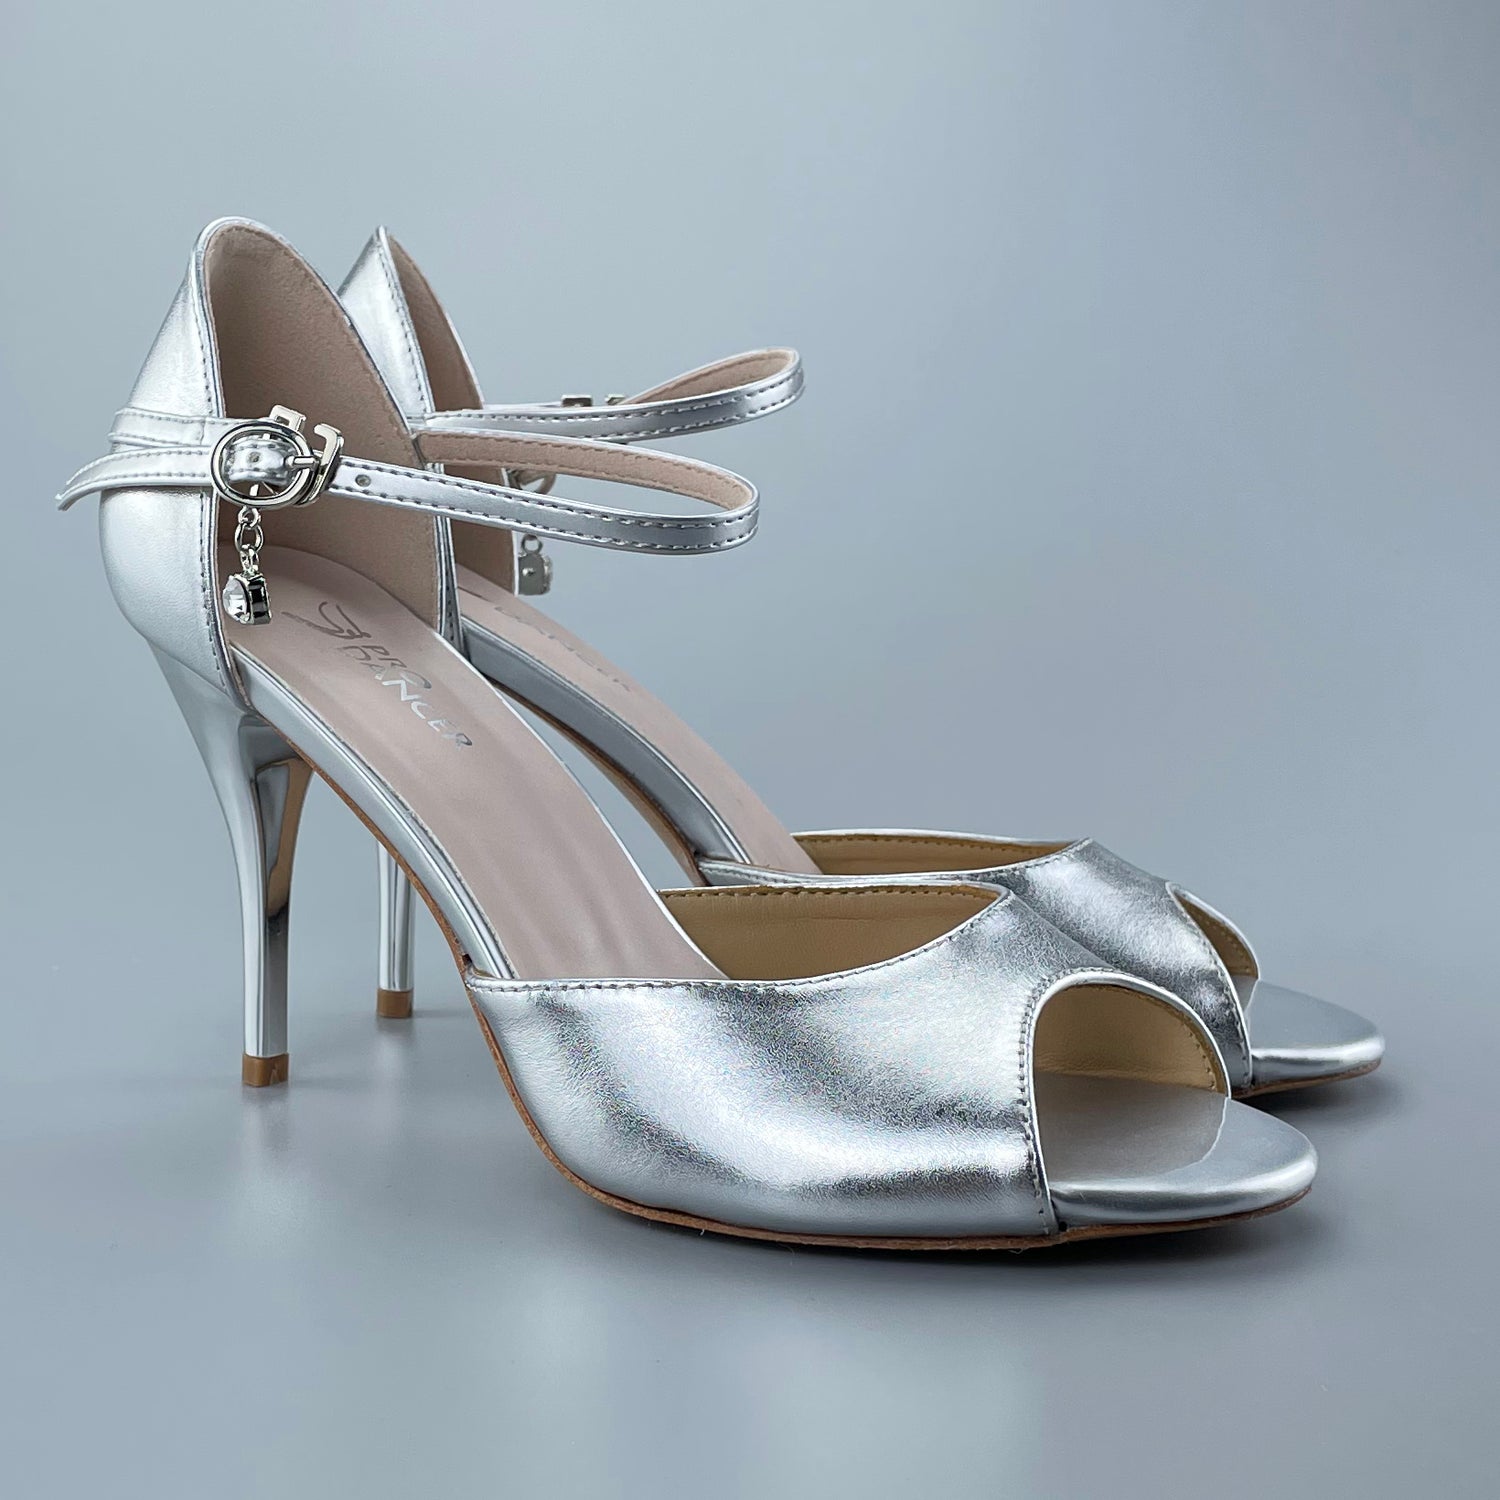 Pro Dancer Tango Shoes silver open-toe salsa heels with leather sole7